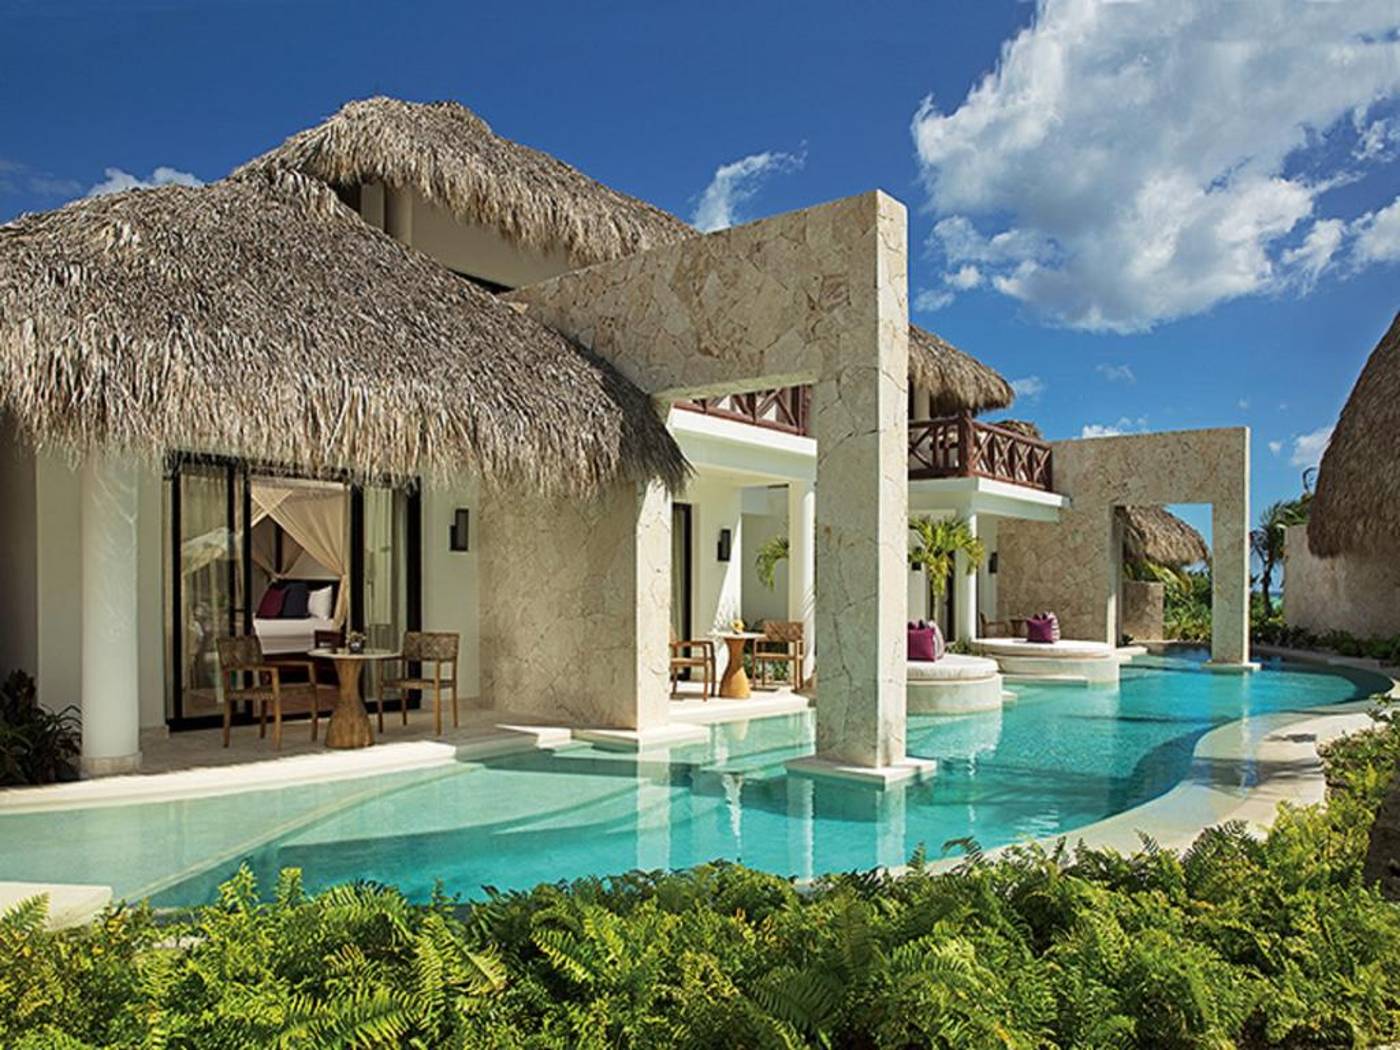 Secrets Cap Cana - Adults Only in Dominican Republic